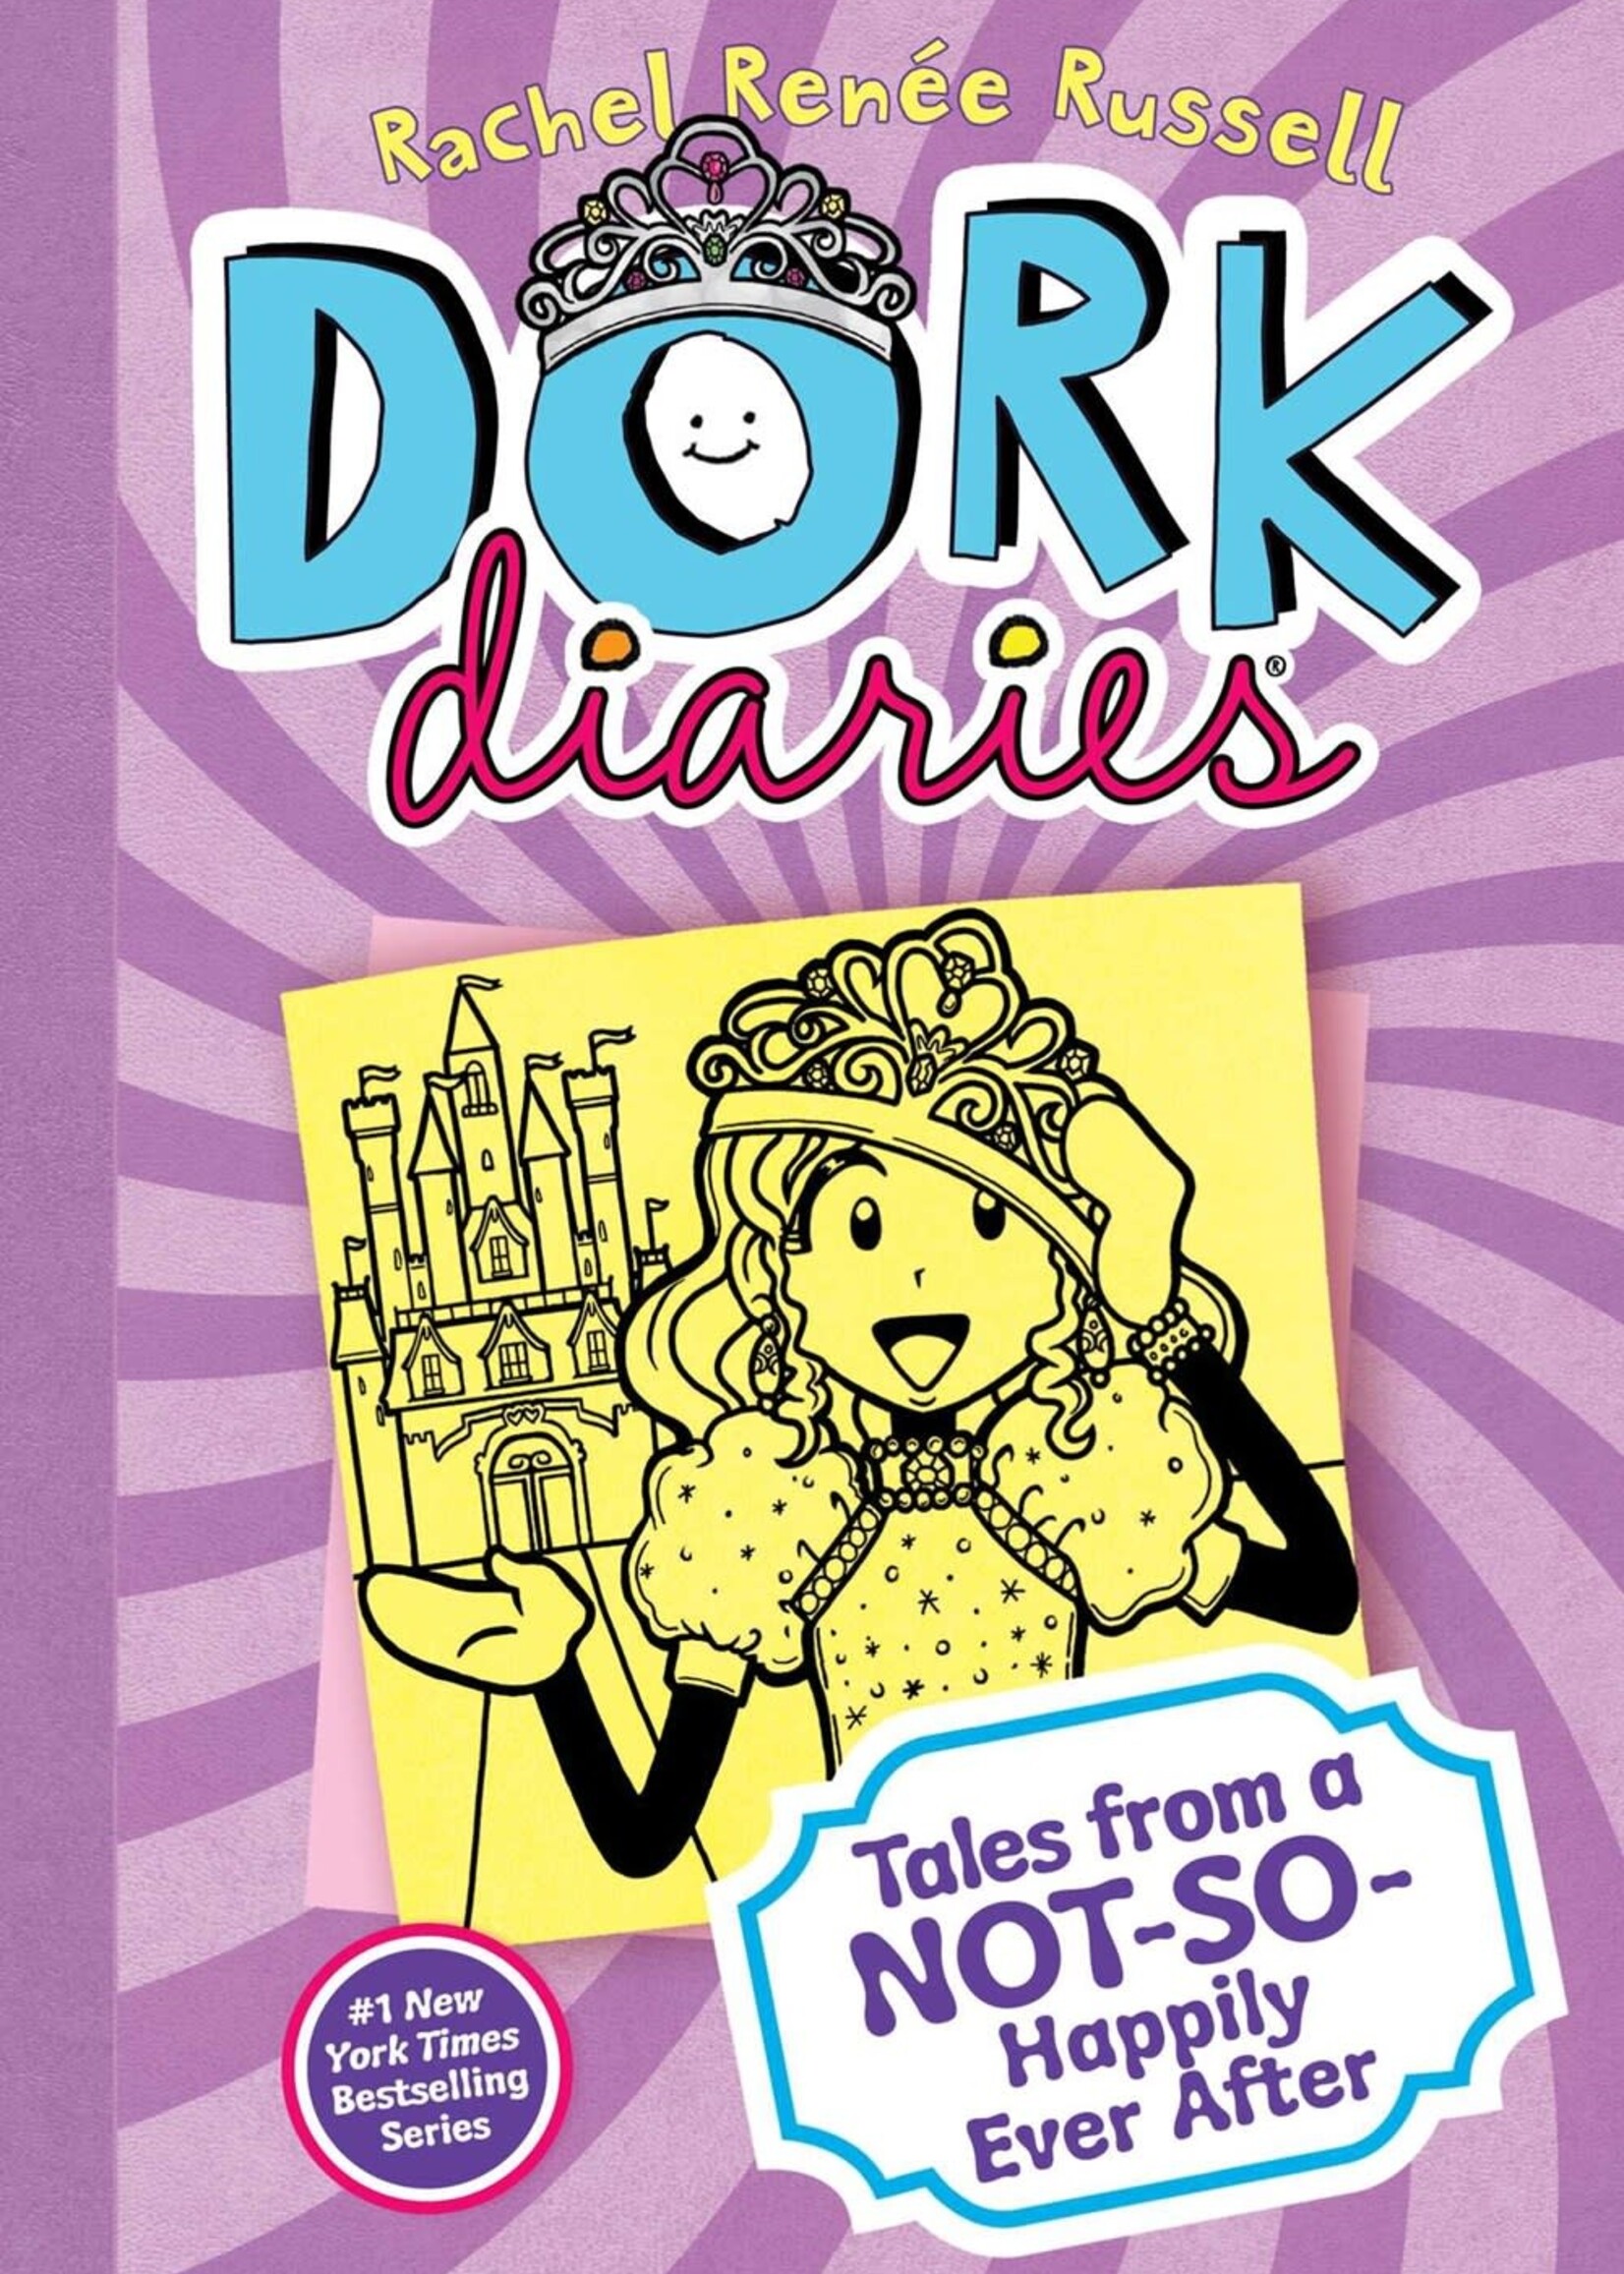 Aladdin Paperbacks Dork Diaries 8 Tales from a Not-So-Happily Ever After